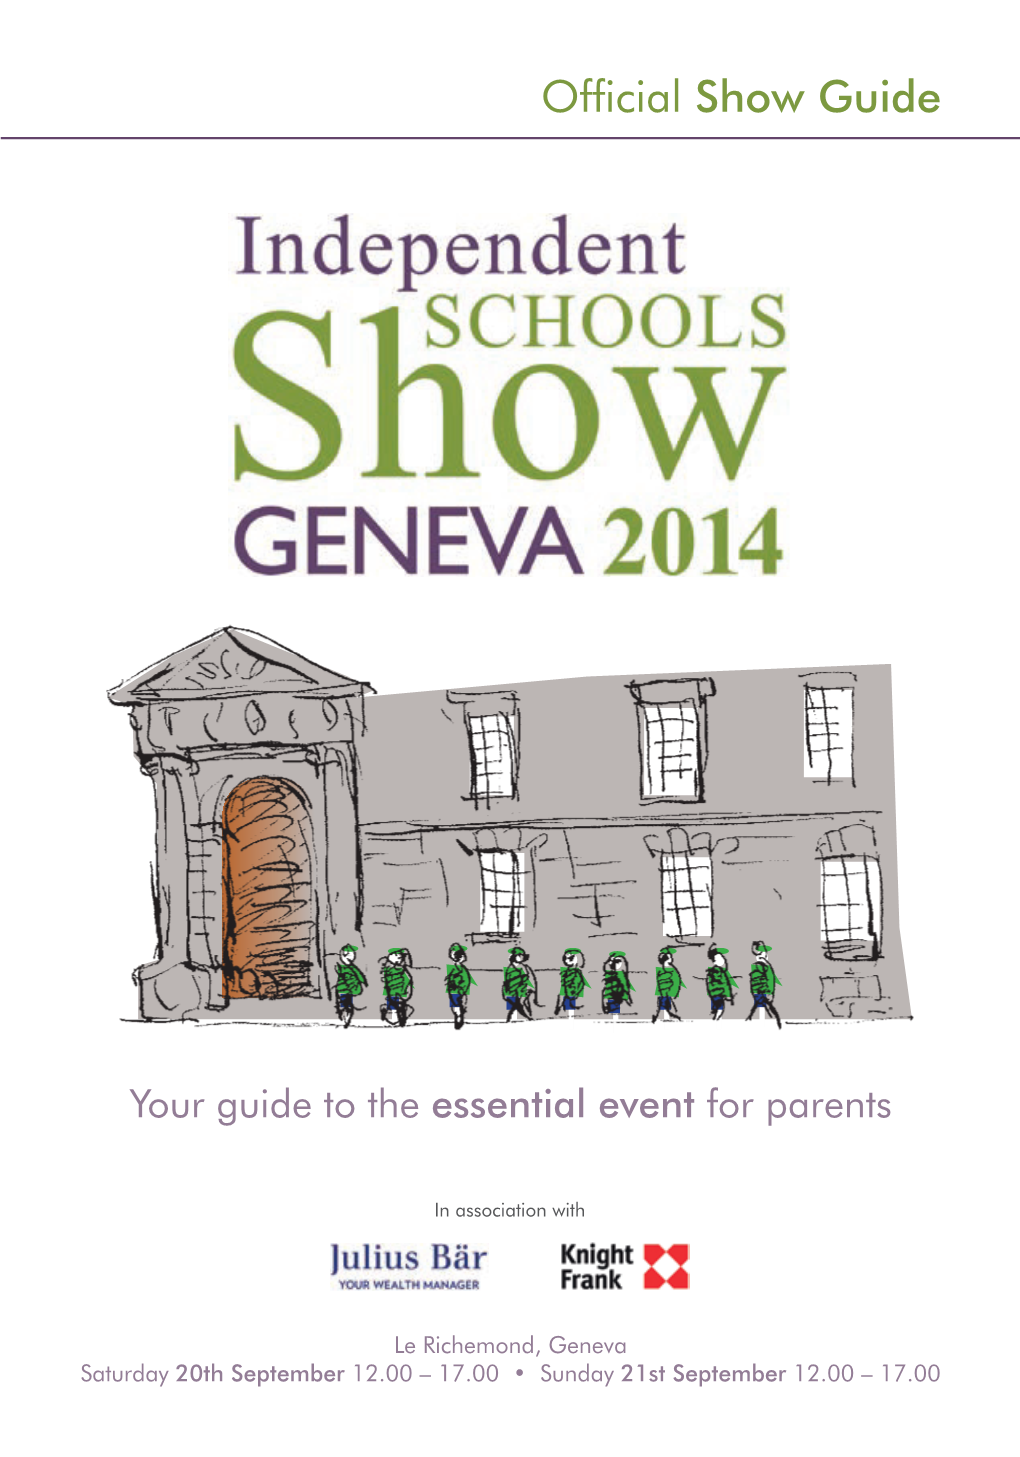 Official Show Guide